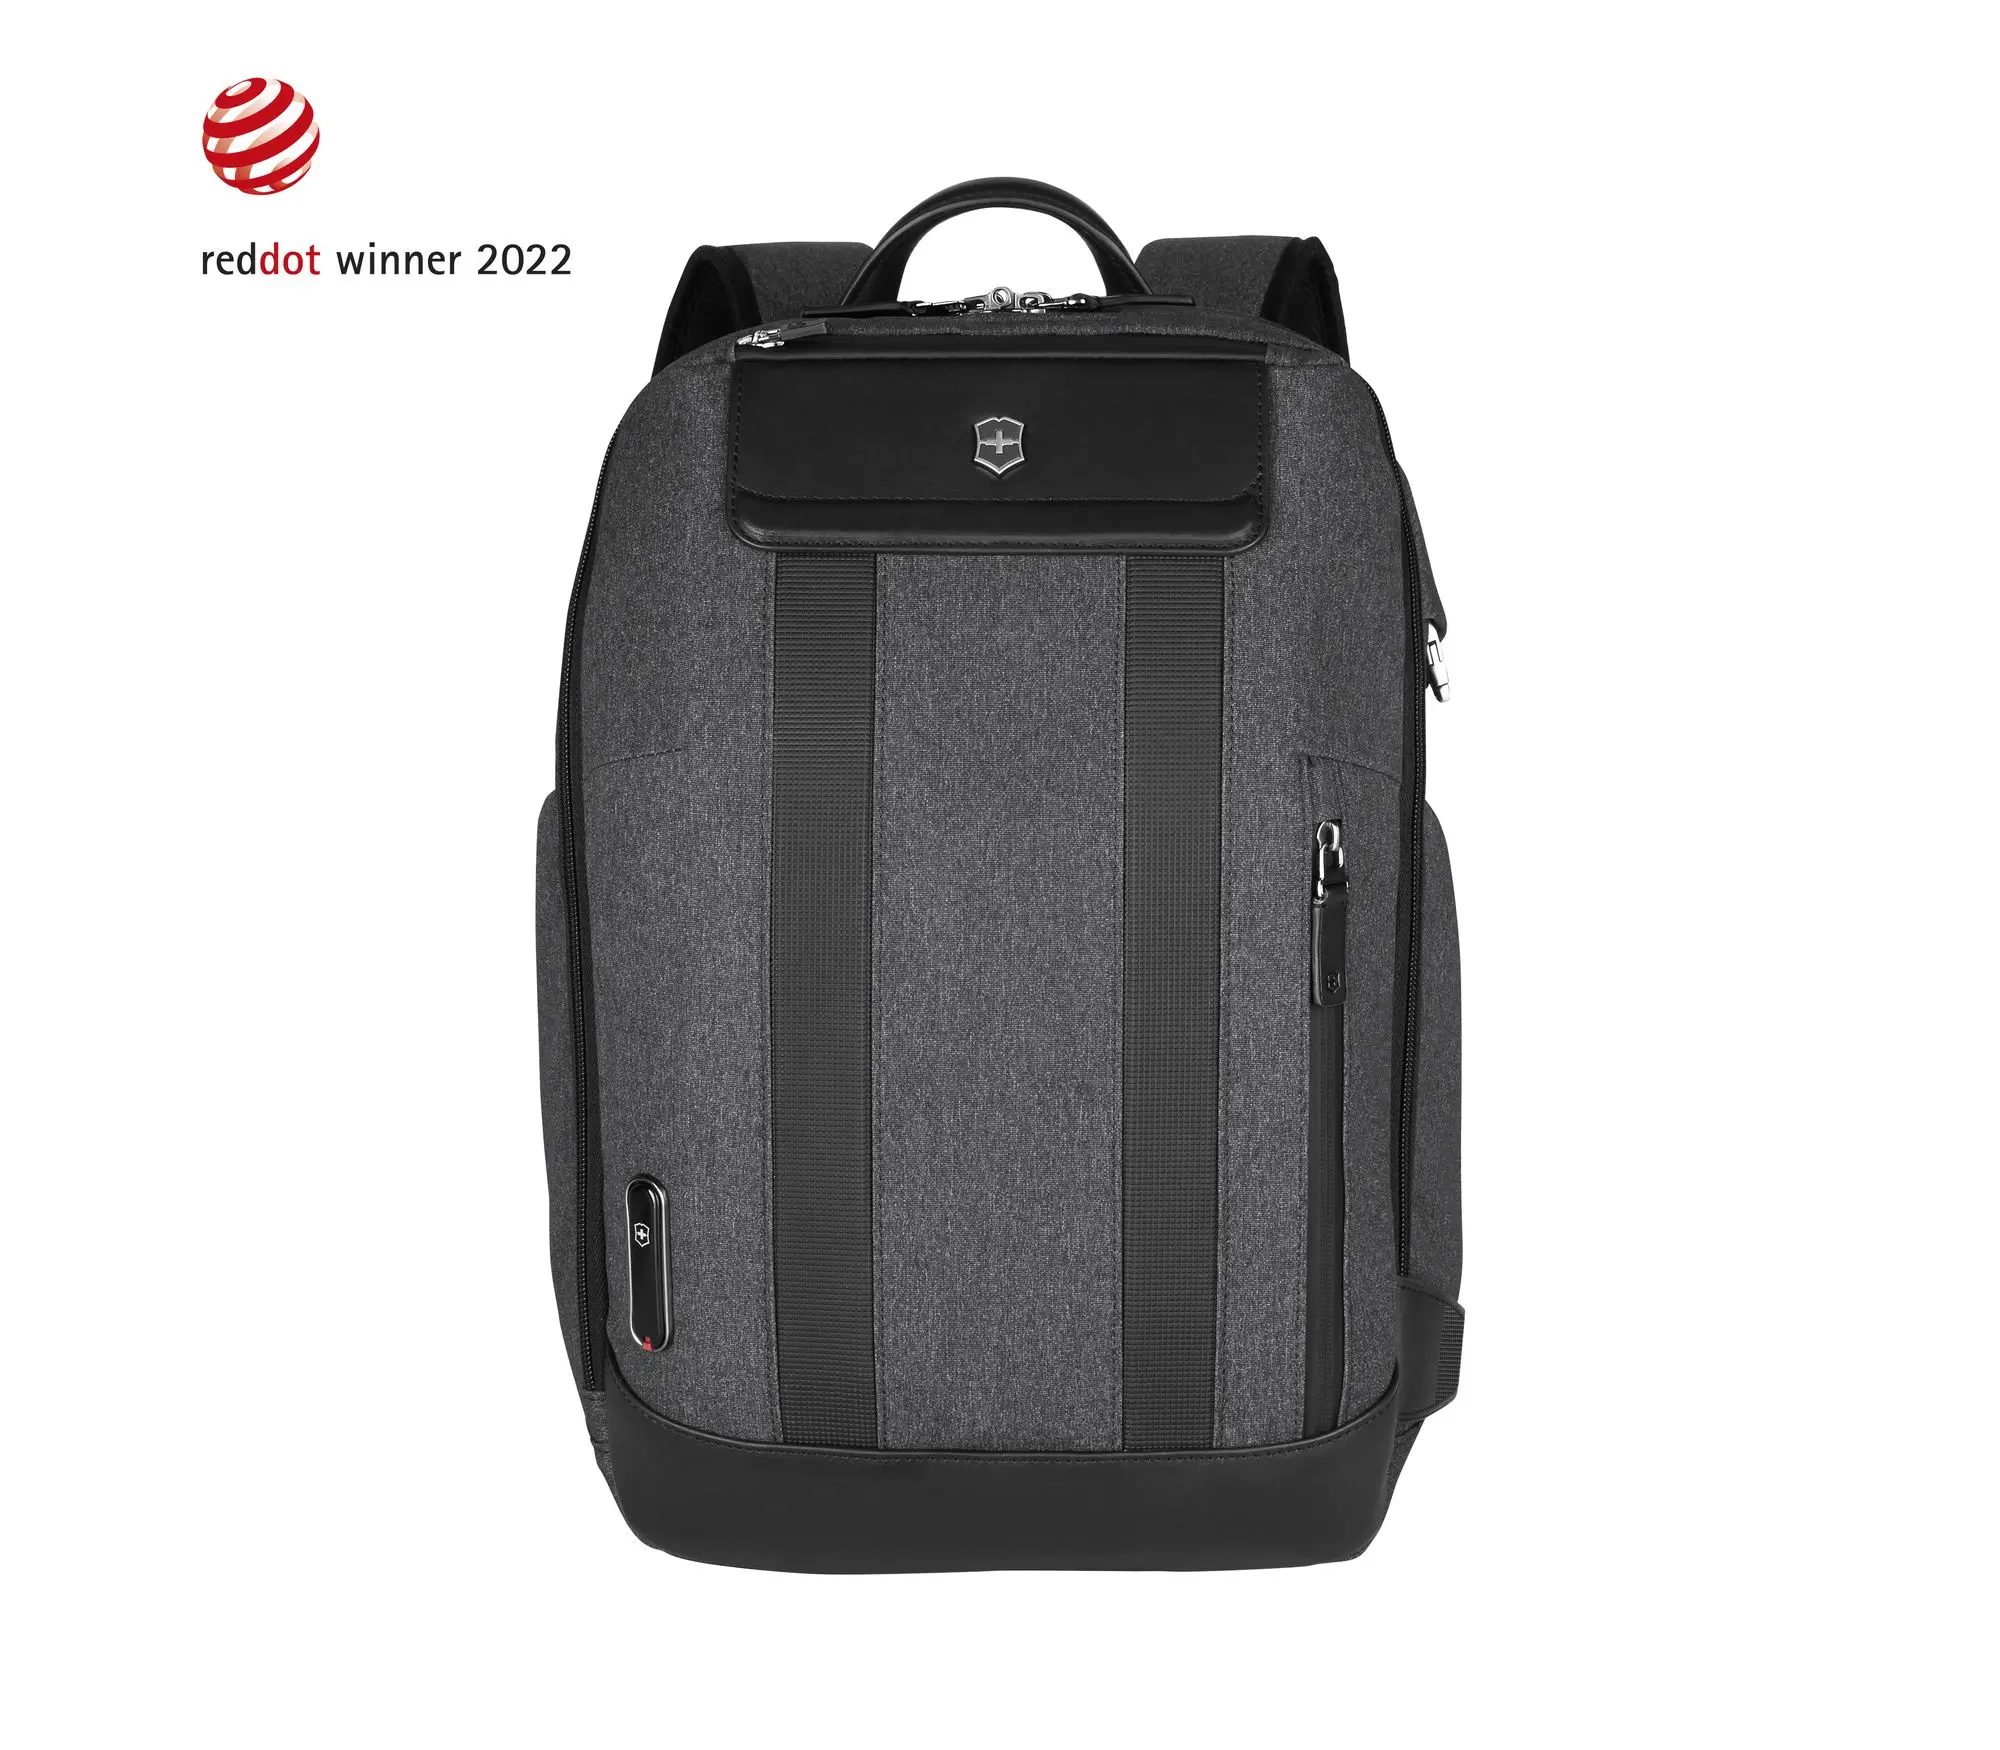 ARCHITECTURE URBAN2 CITY BACKPACK - Urban Traveller